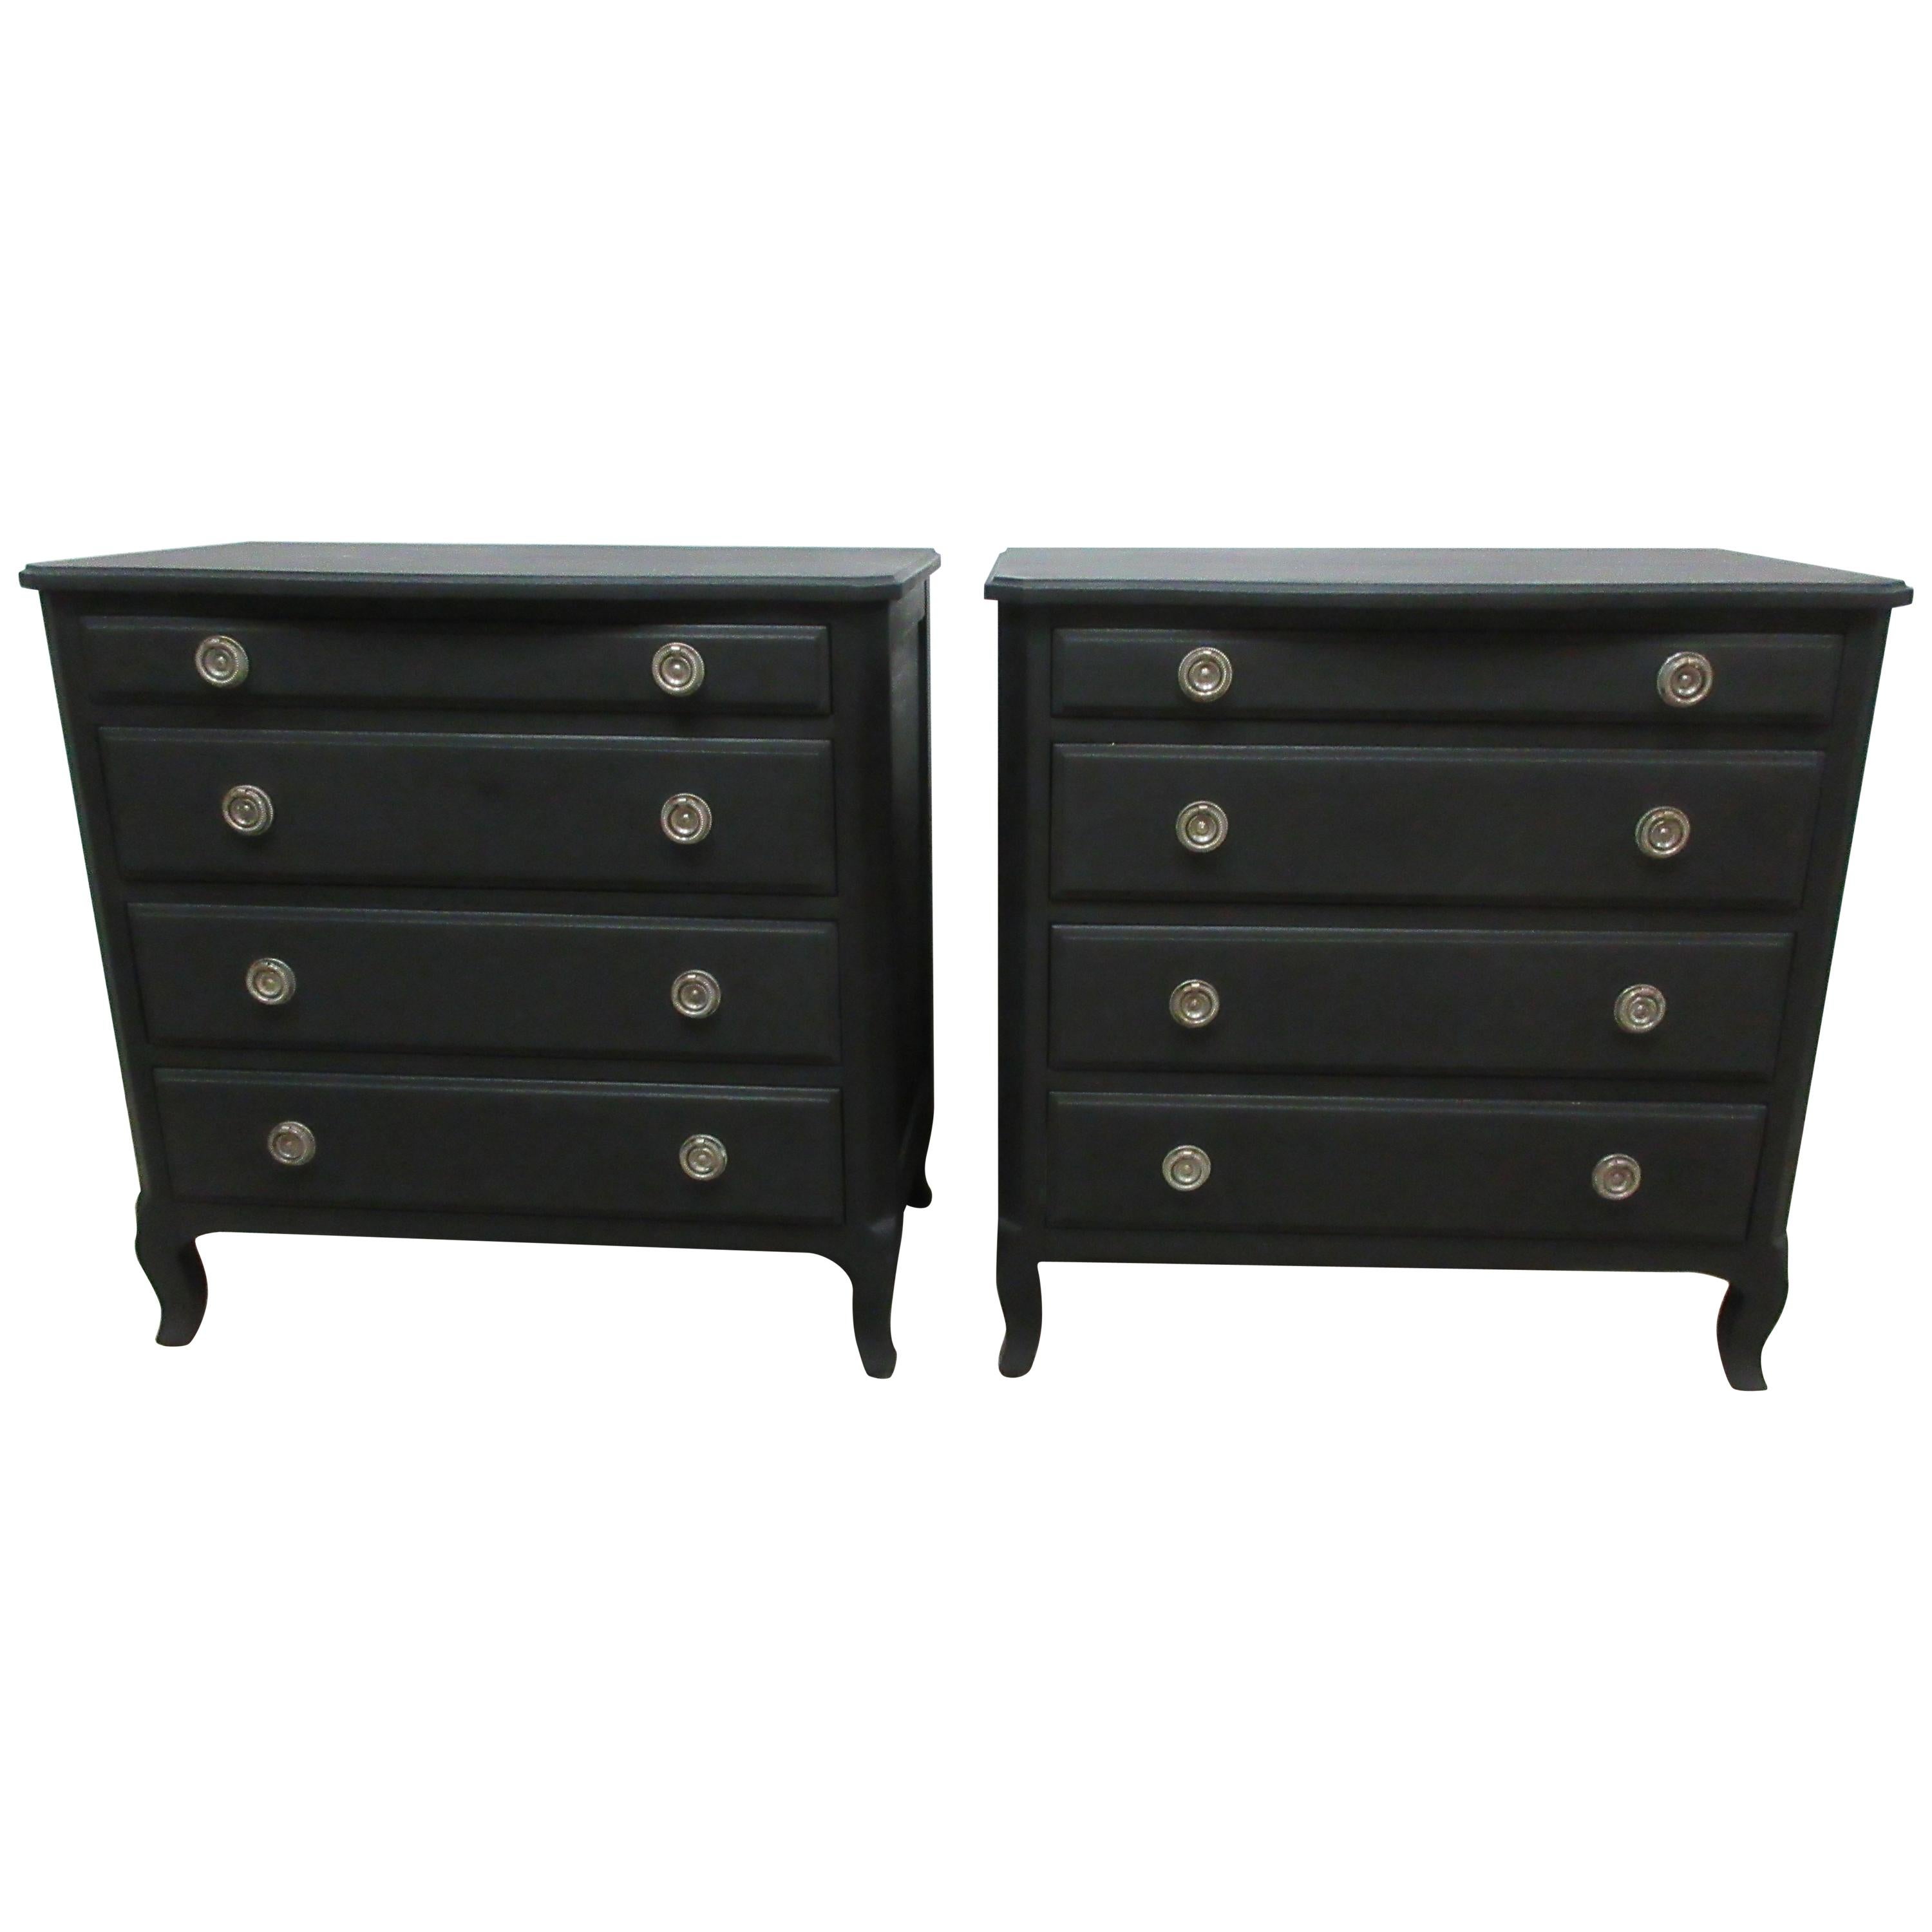 Matching Midnight Black Chest of Drawers